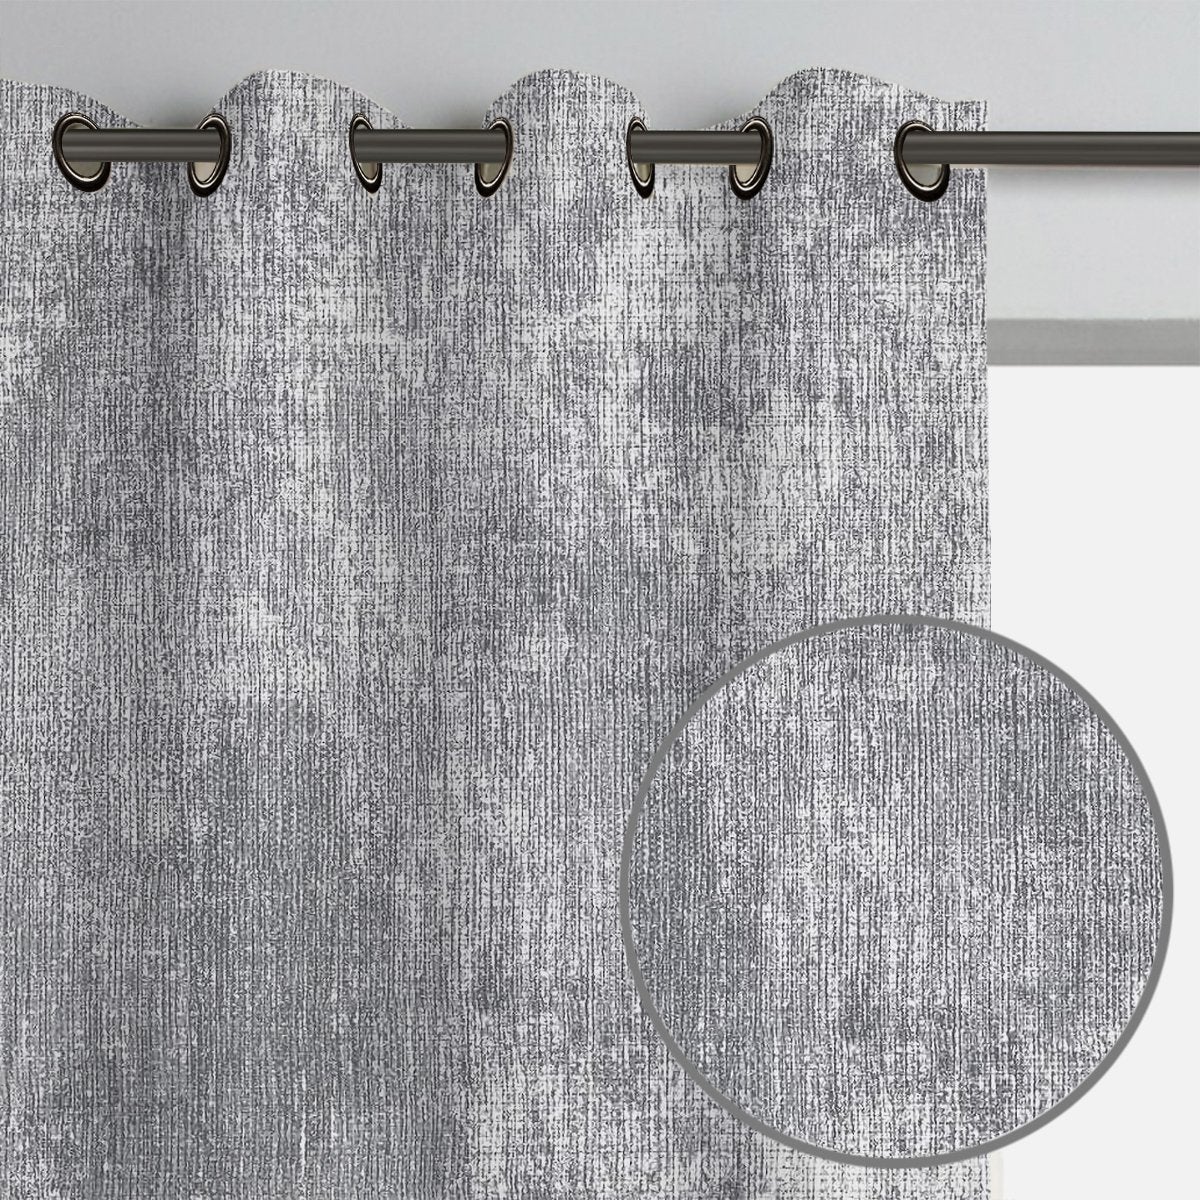 Gray Drapery - Our Favorite Gray Drapes & Curtains (Blackout Available)